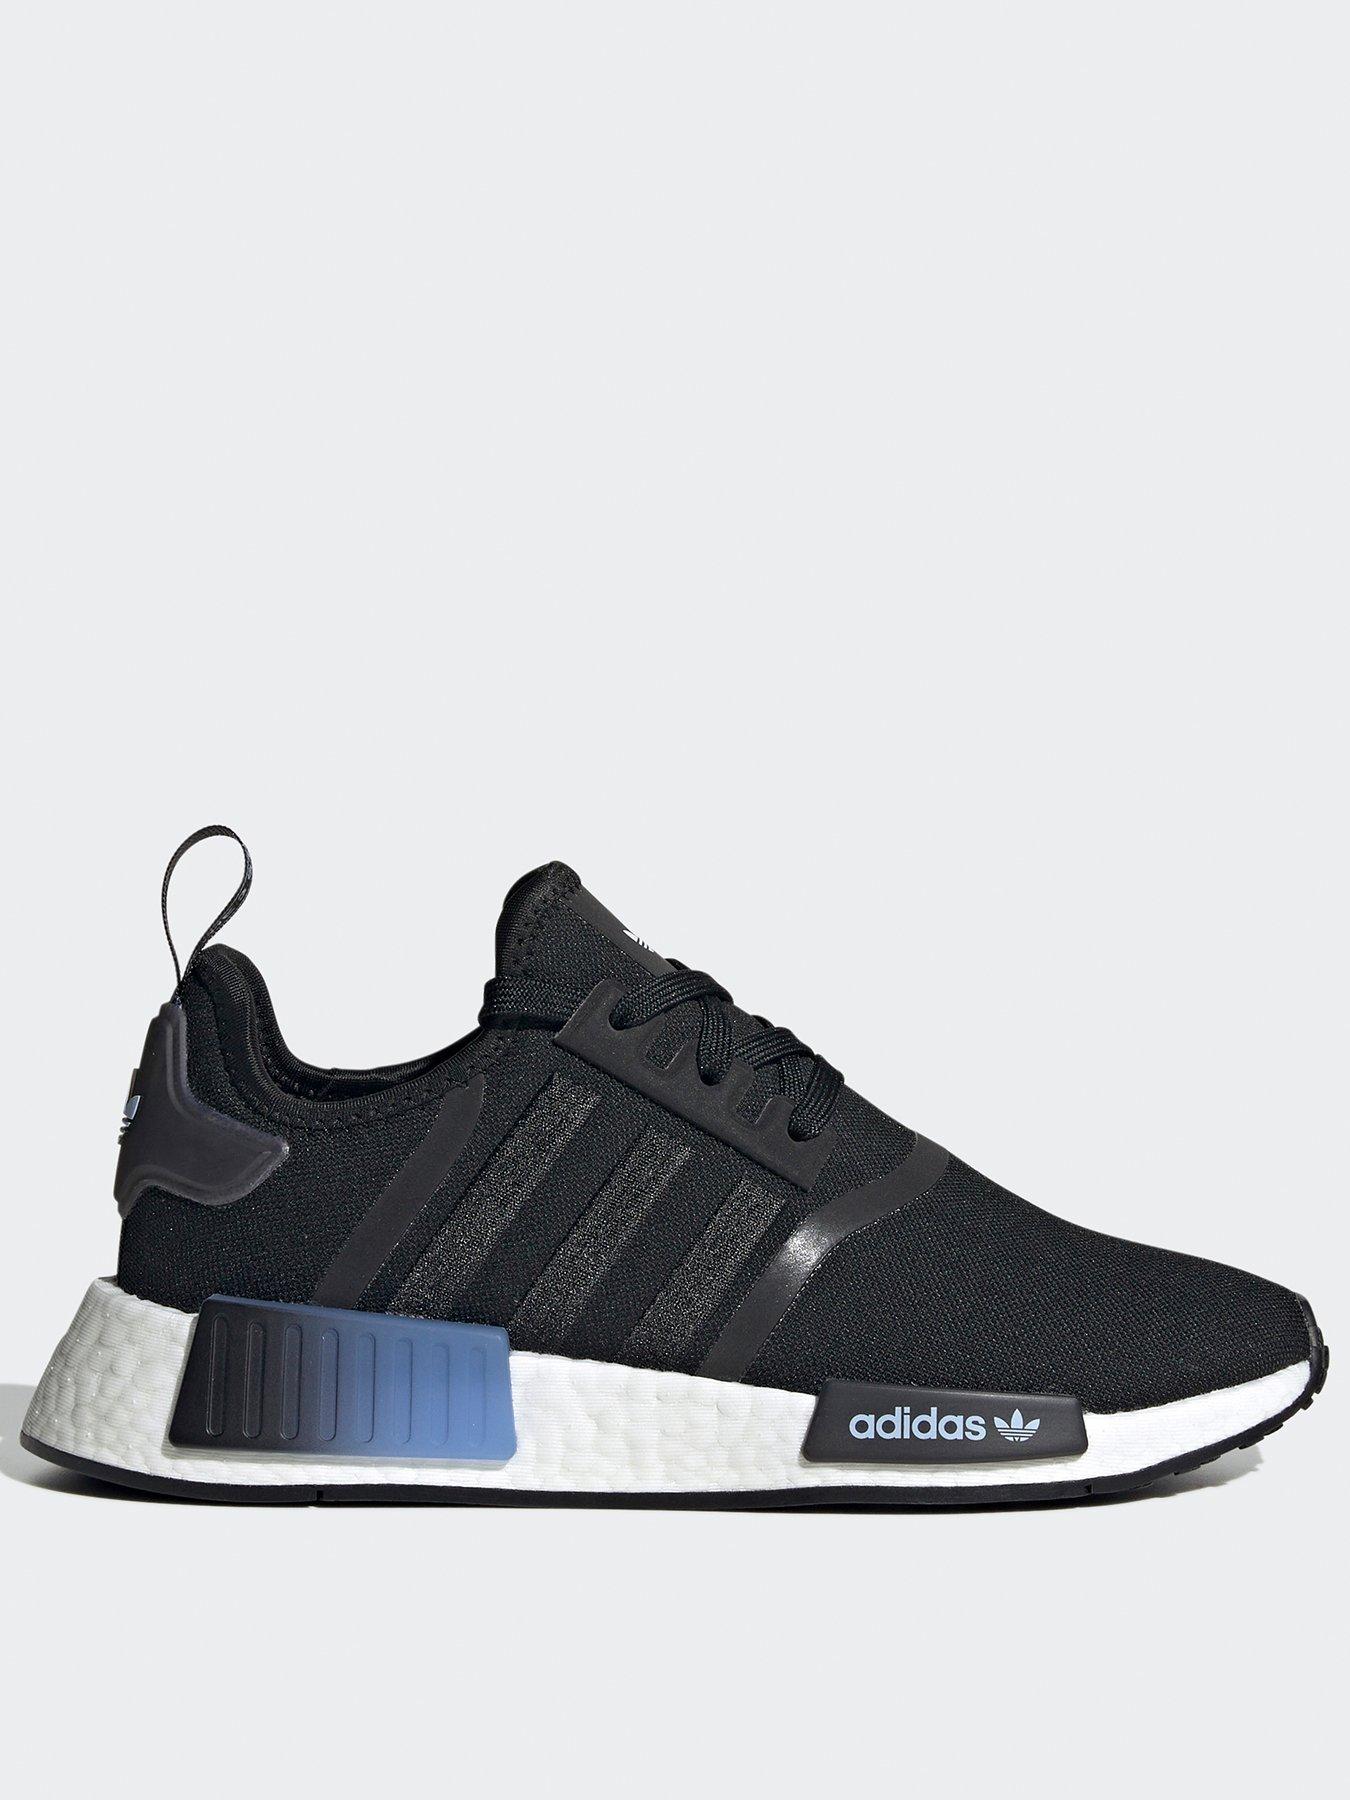 spiller atom let adidas Originals NMD | Womens sports shoes | Sports & leisure | www.very.co. uk